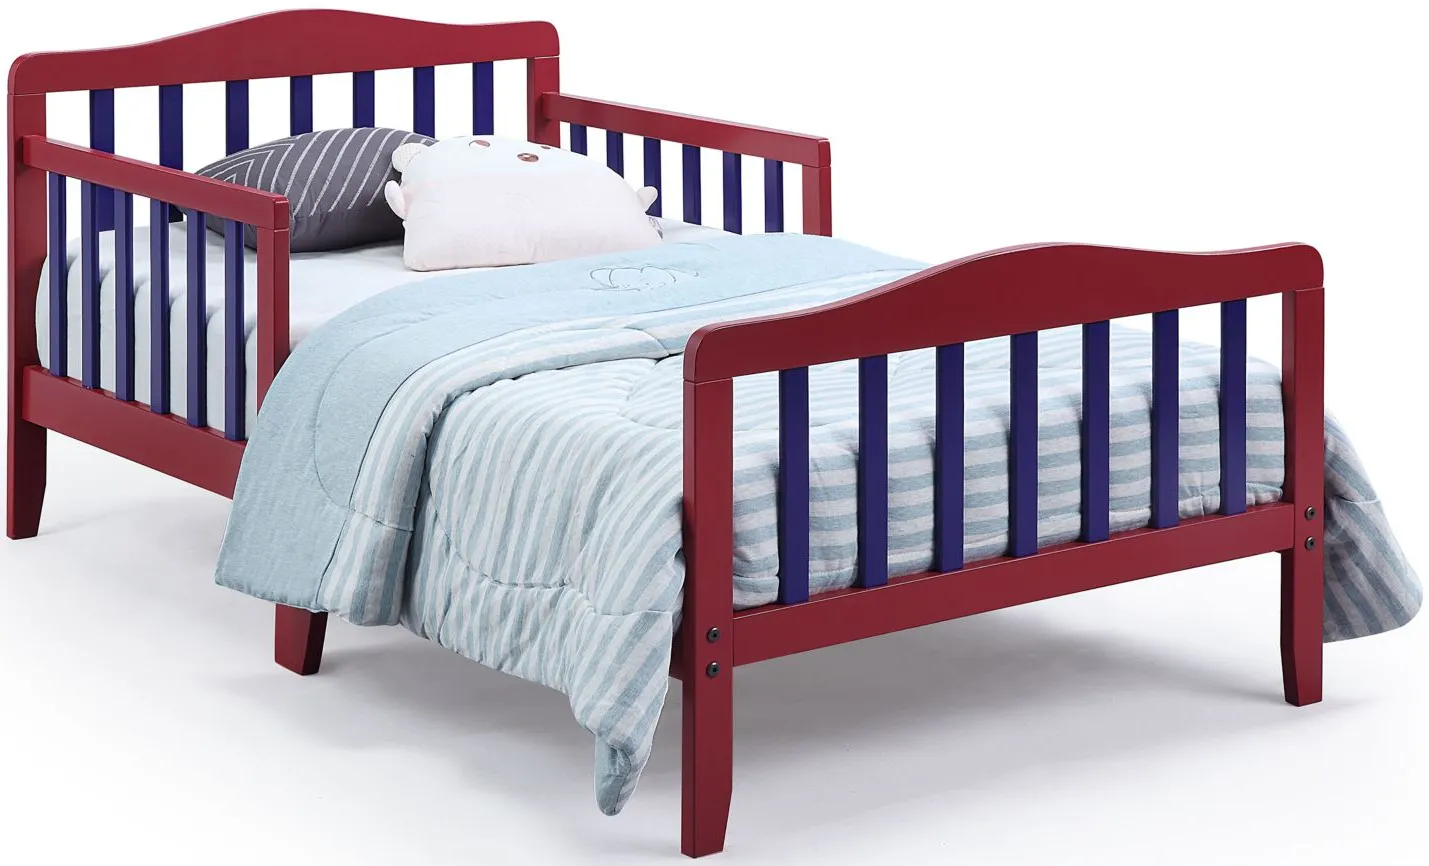 Twain Toddler Bed in Red/Blue by Heritage Baby